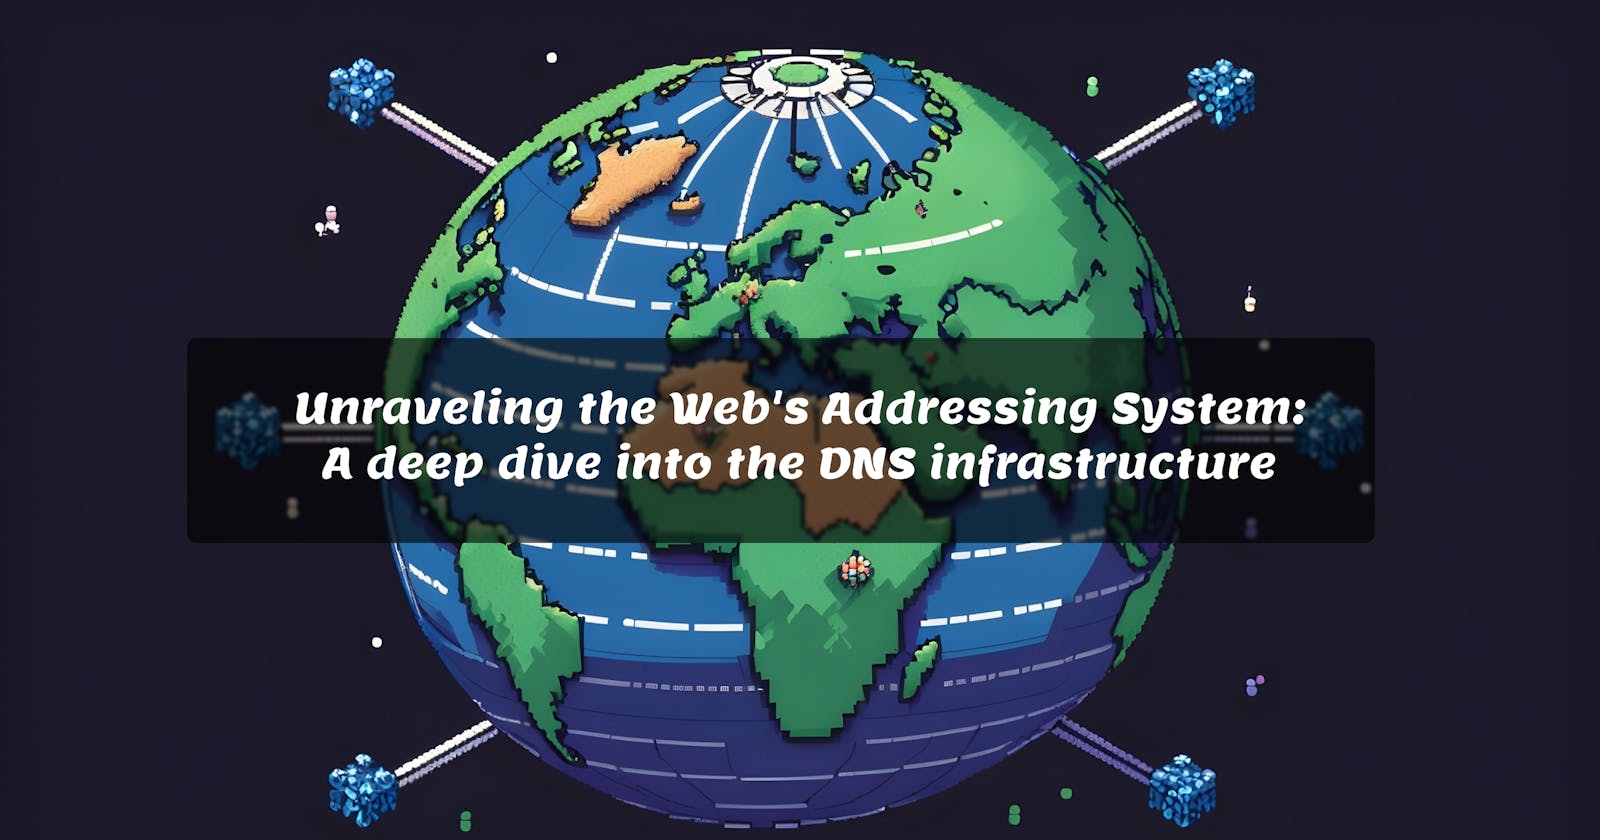 Unraveling the Web's Addressing System: A deep dive into the DNS infrastructure